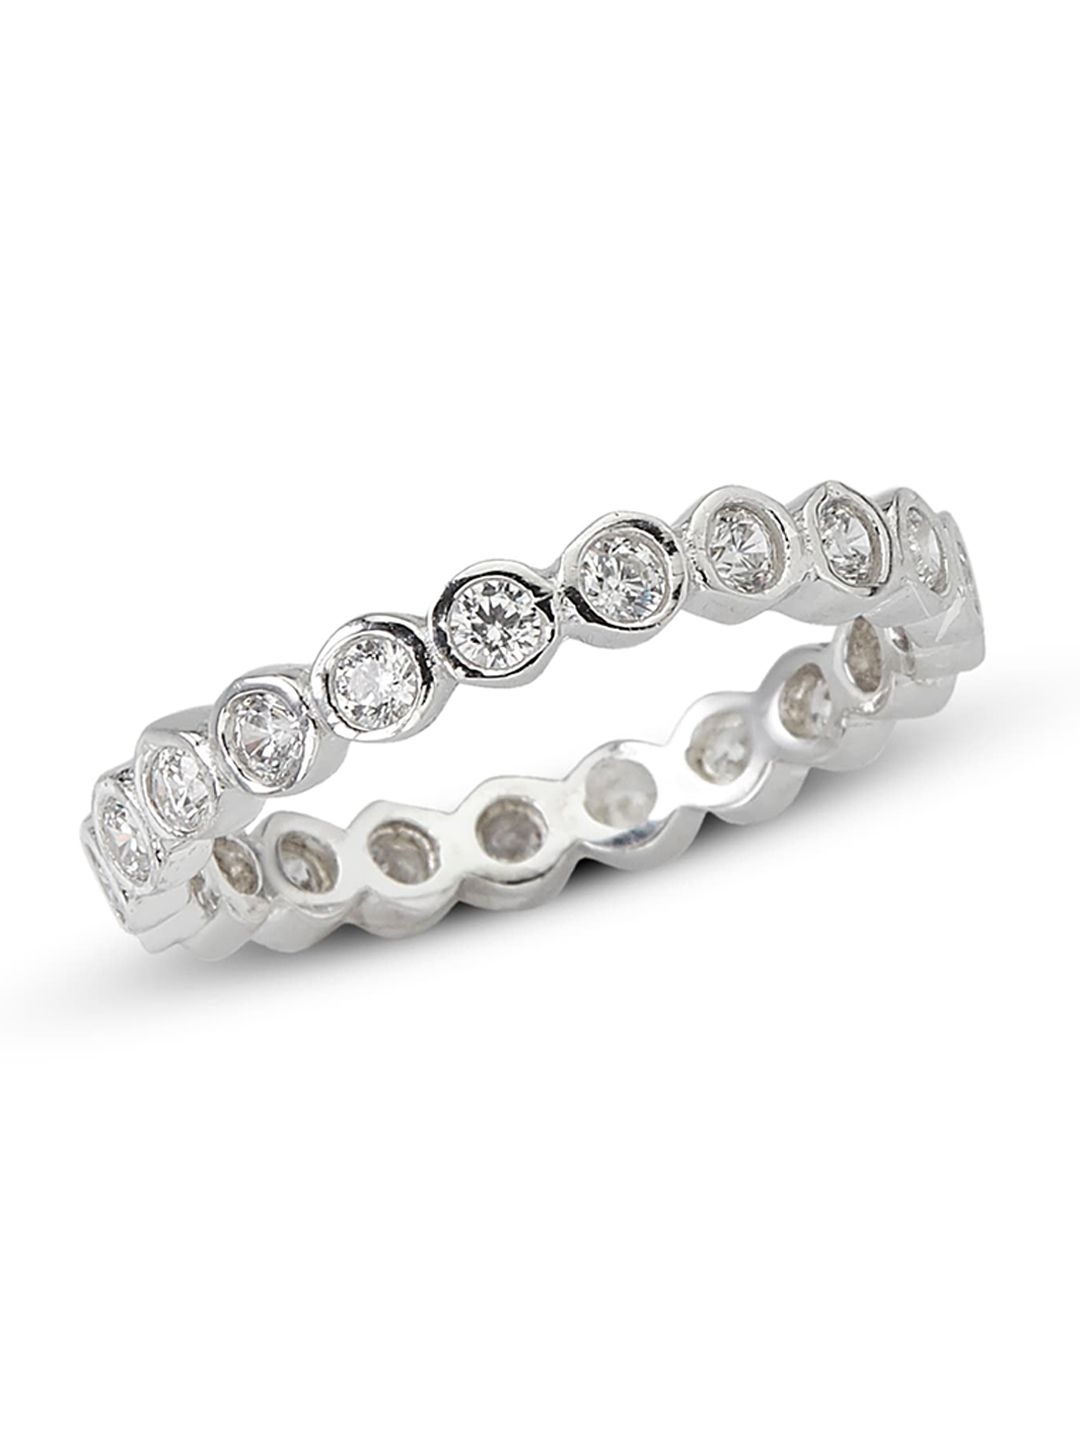 ANAYRA Silver-Toned & White CZ-Studded Finger Ring Price in India